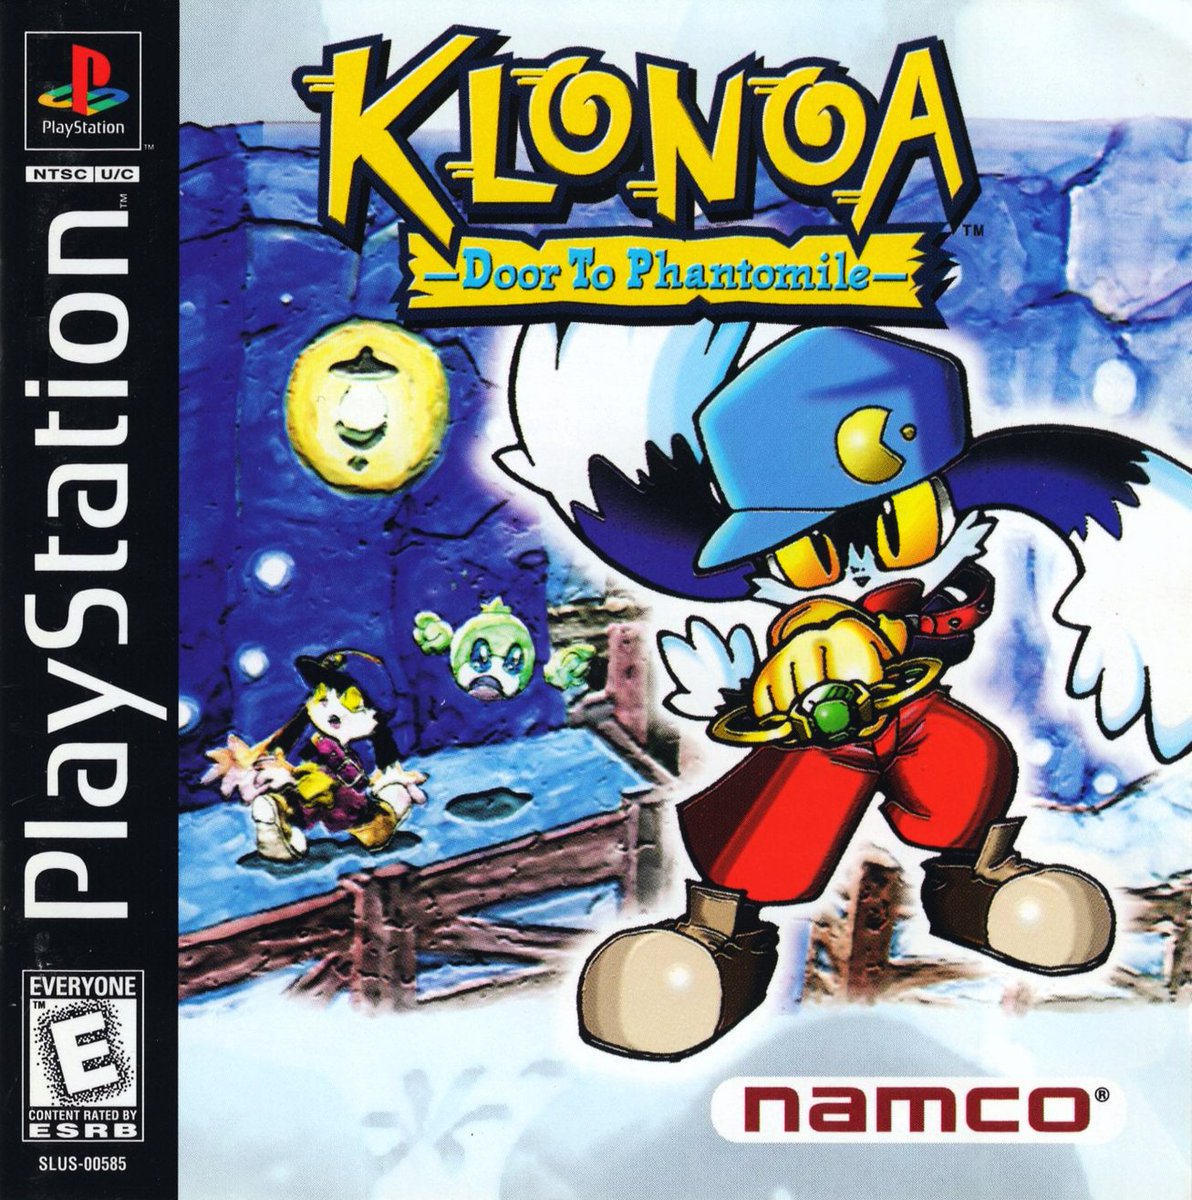 Cool Box Art on Twitter: "Klonoa: Door to Phantomile / PlayStation / Namco  / 1998 https://t.co/2xbQ7odVRx" / Twitter